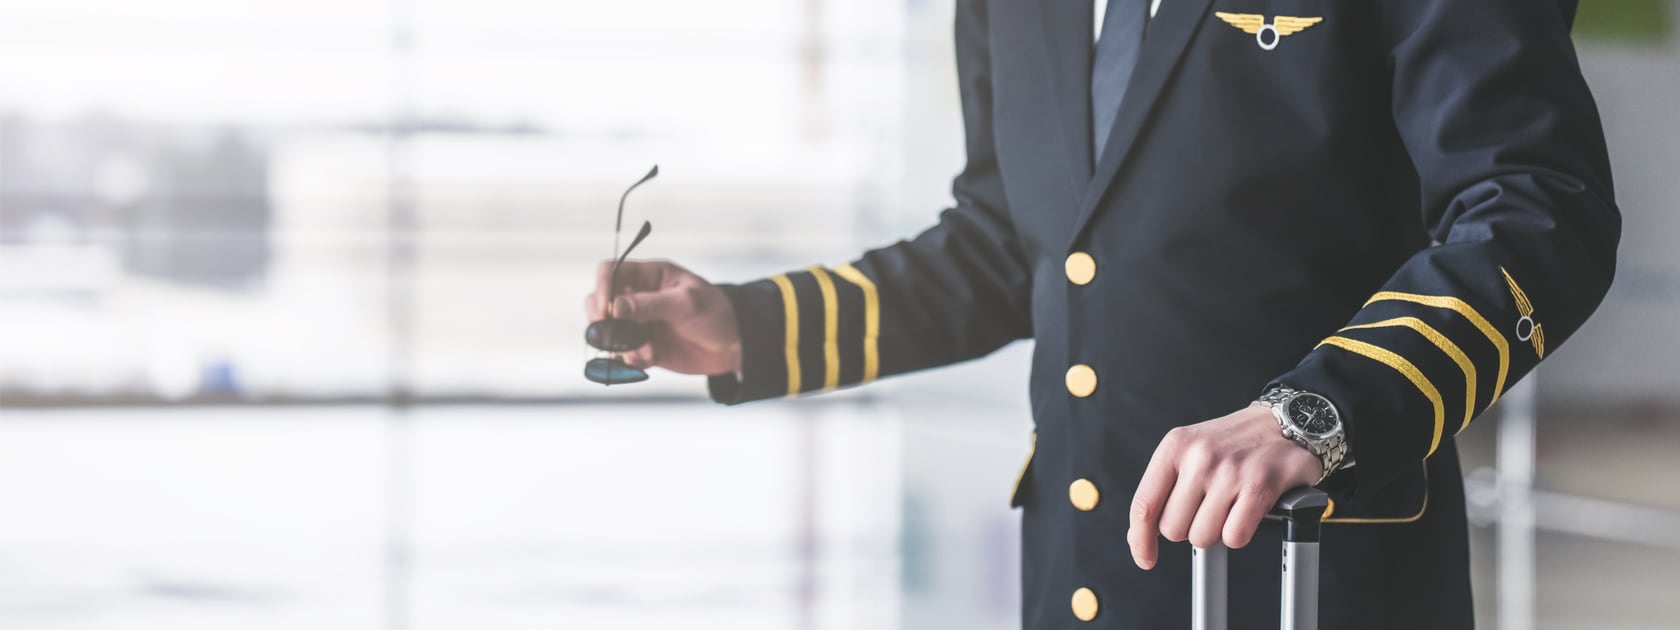 A pilot in uniform standing in an airport waiting room about to board a plane.